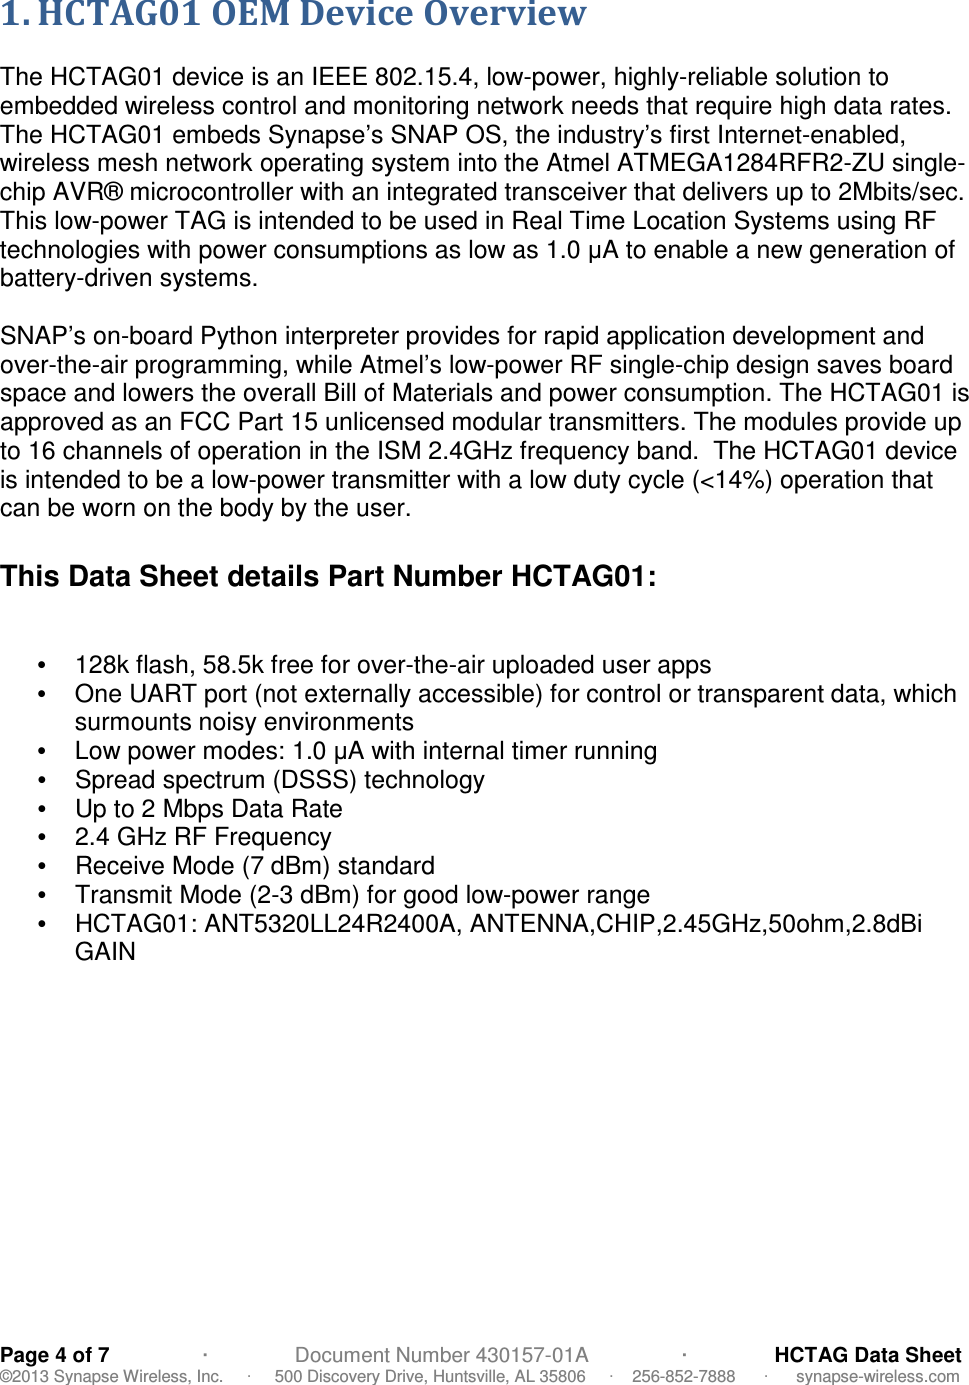   Page 4 of 7                ·               Document Number 430157-01A                ·               HCTAG Data Sheet ©2013 Synapse Wireless, Inc.     ·     500 Discovery Drive, Huntsville, AL 35806     ·    256-852-7888      ·      synapse-wireless.com 1. HCTAG01 OEM Device Overview  The HCTAG01 device is an IEEE 802.15.4, low-power, highly-reliable solution to embedded wireless control and monitoring network needs that require high data rates. The HCTAG01 embeds Synapse’s SNAP OS, the industry’s first Internet-enabled, wireless mesh network operating system into the Atmel ATMEGA1284RFR2-ZU single-chip AVR® microcontroller with an integrated transceiver that delivers up to 2Mbits/sec. This low-power TAG is intended to be used in Real Time Location Systems using RF technologies with power consumptions as low as 1.0 µA to enable a new generation of battery-driven systems.  SNAP’s on-board Python interpreter provides for rapid application development and over-the-air programming, while Atmel’s low-power RF single-chip design saves board space and lowers the overall Bill of Materials and power consumption. The HCTAG01 is approved as an FCC Part 15 unlicensed modular transmitters. The modules provide up to 16 channels of operation in the ISM 2.4GHz frequency band.  The HCTAG01 device is intended to be a low-power transmitter with a low duty cycle (&lt;14%) operation that can be worn on the body by the user.  This Data Sheet details Part Number HCTAG01:   •  128k flash, 58.5k free for over-the-air uploaded user apps •  One UART port (not externally accessible) for control or transparent data, which surmounts noisy environments   •  Low power modes: 1.0 µA with internal timer running •  Spread spectrum (DSSS) technology  •  Up to 2 Mbps Data Rate •  2.4 GHz RF Frequency •  Receive Mode (7 dBm) standard •  Transmit Mode (2-3 dBm) for good low-power range •  HCTAG01: ANT5320LL24R2400A, ANTENNA,CHIP,2.45GHz,50ohm,2.8dBi GAIN  